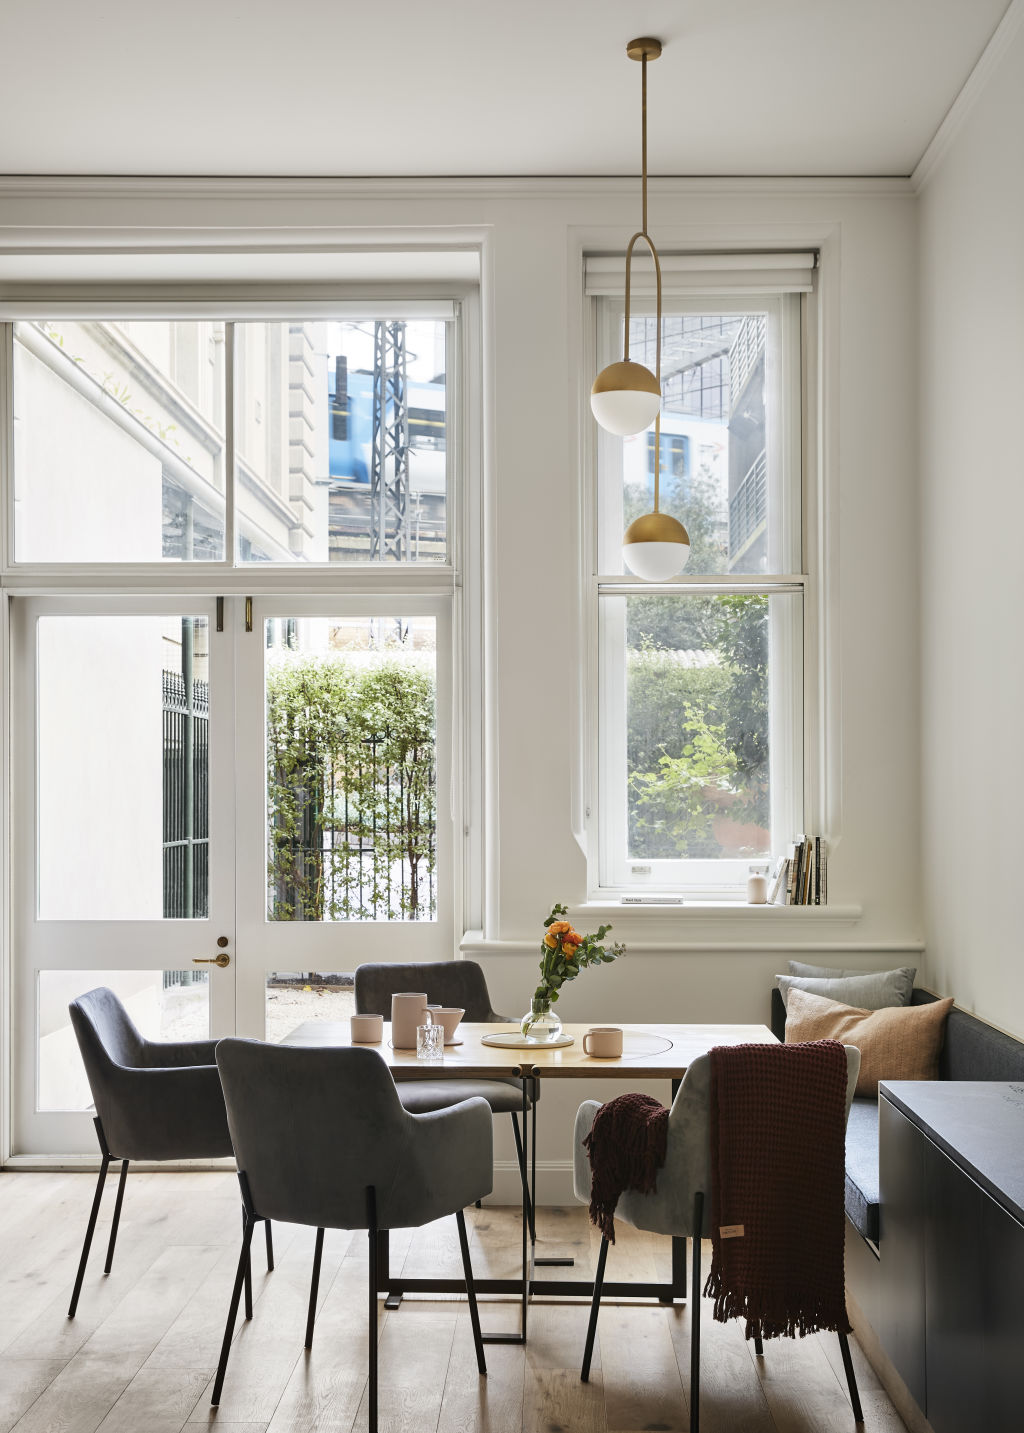 A small round table cleverly transforms into a longer square table. Photo: Tess Kelly